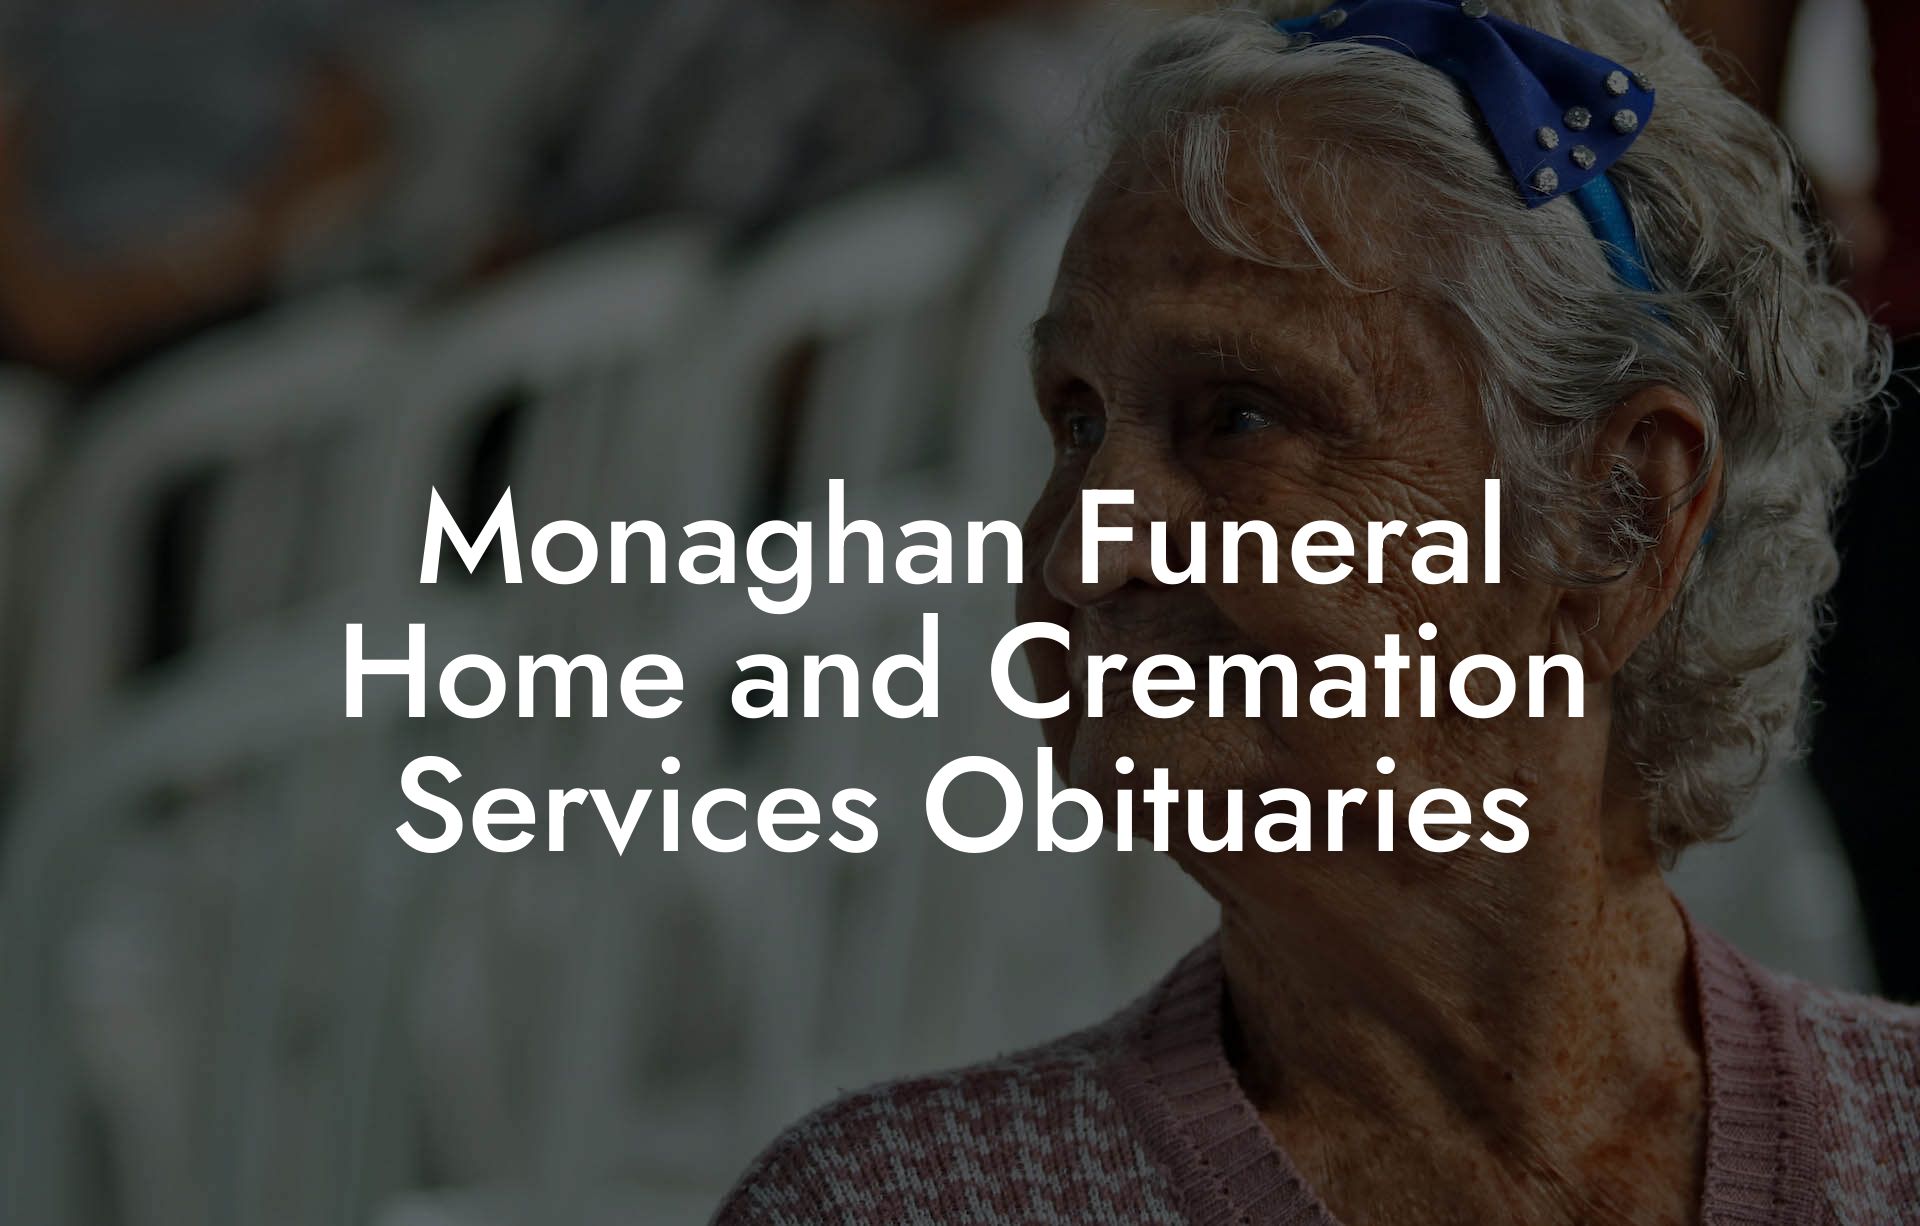 Monaghan Funeral Home and Cremation Services Obituaries